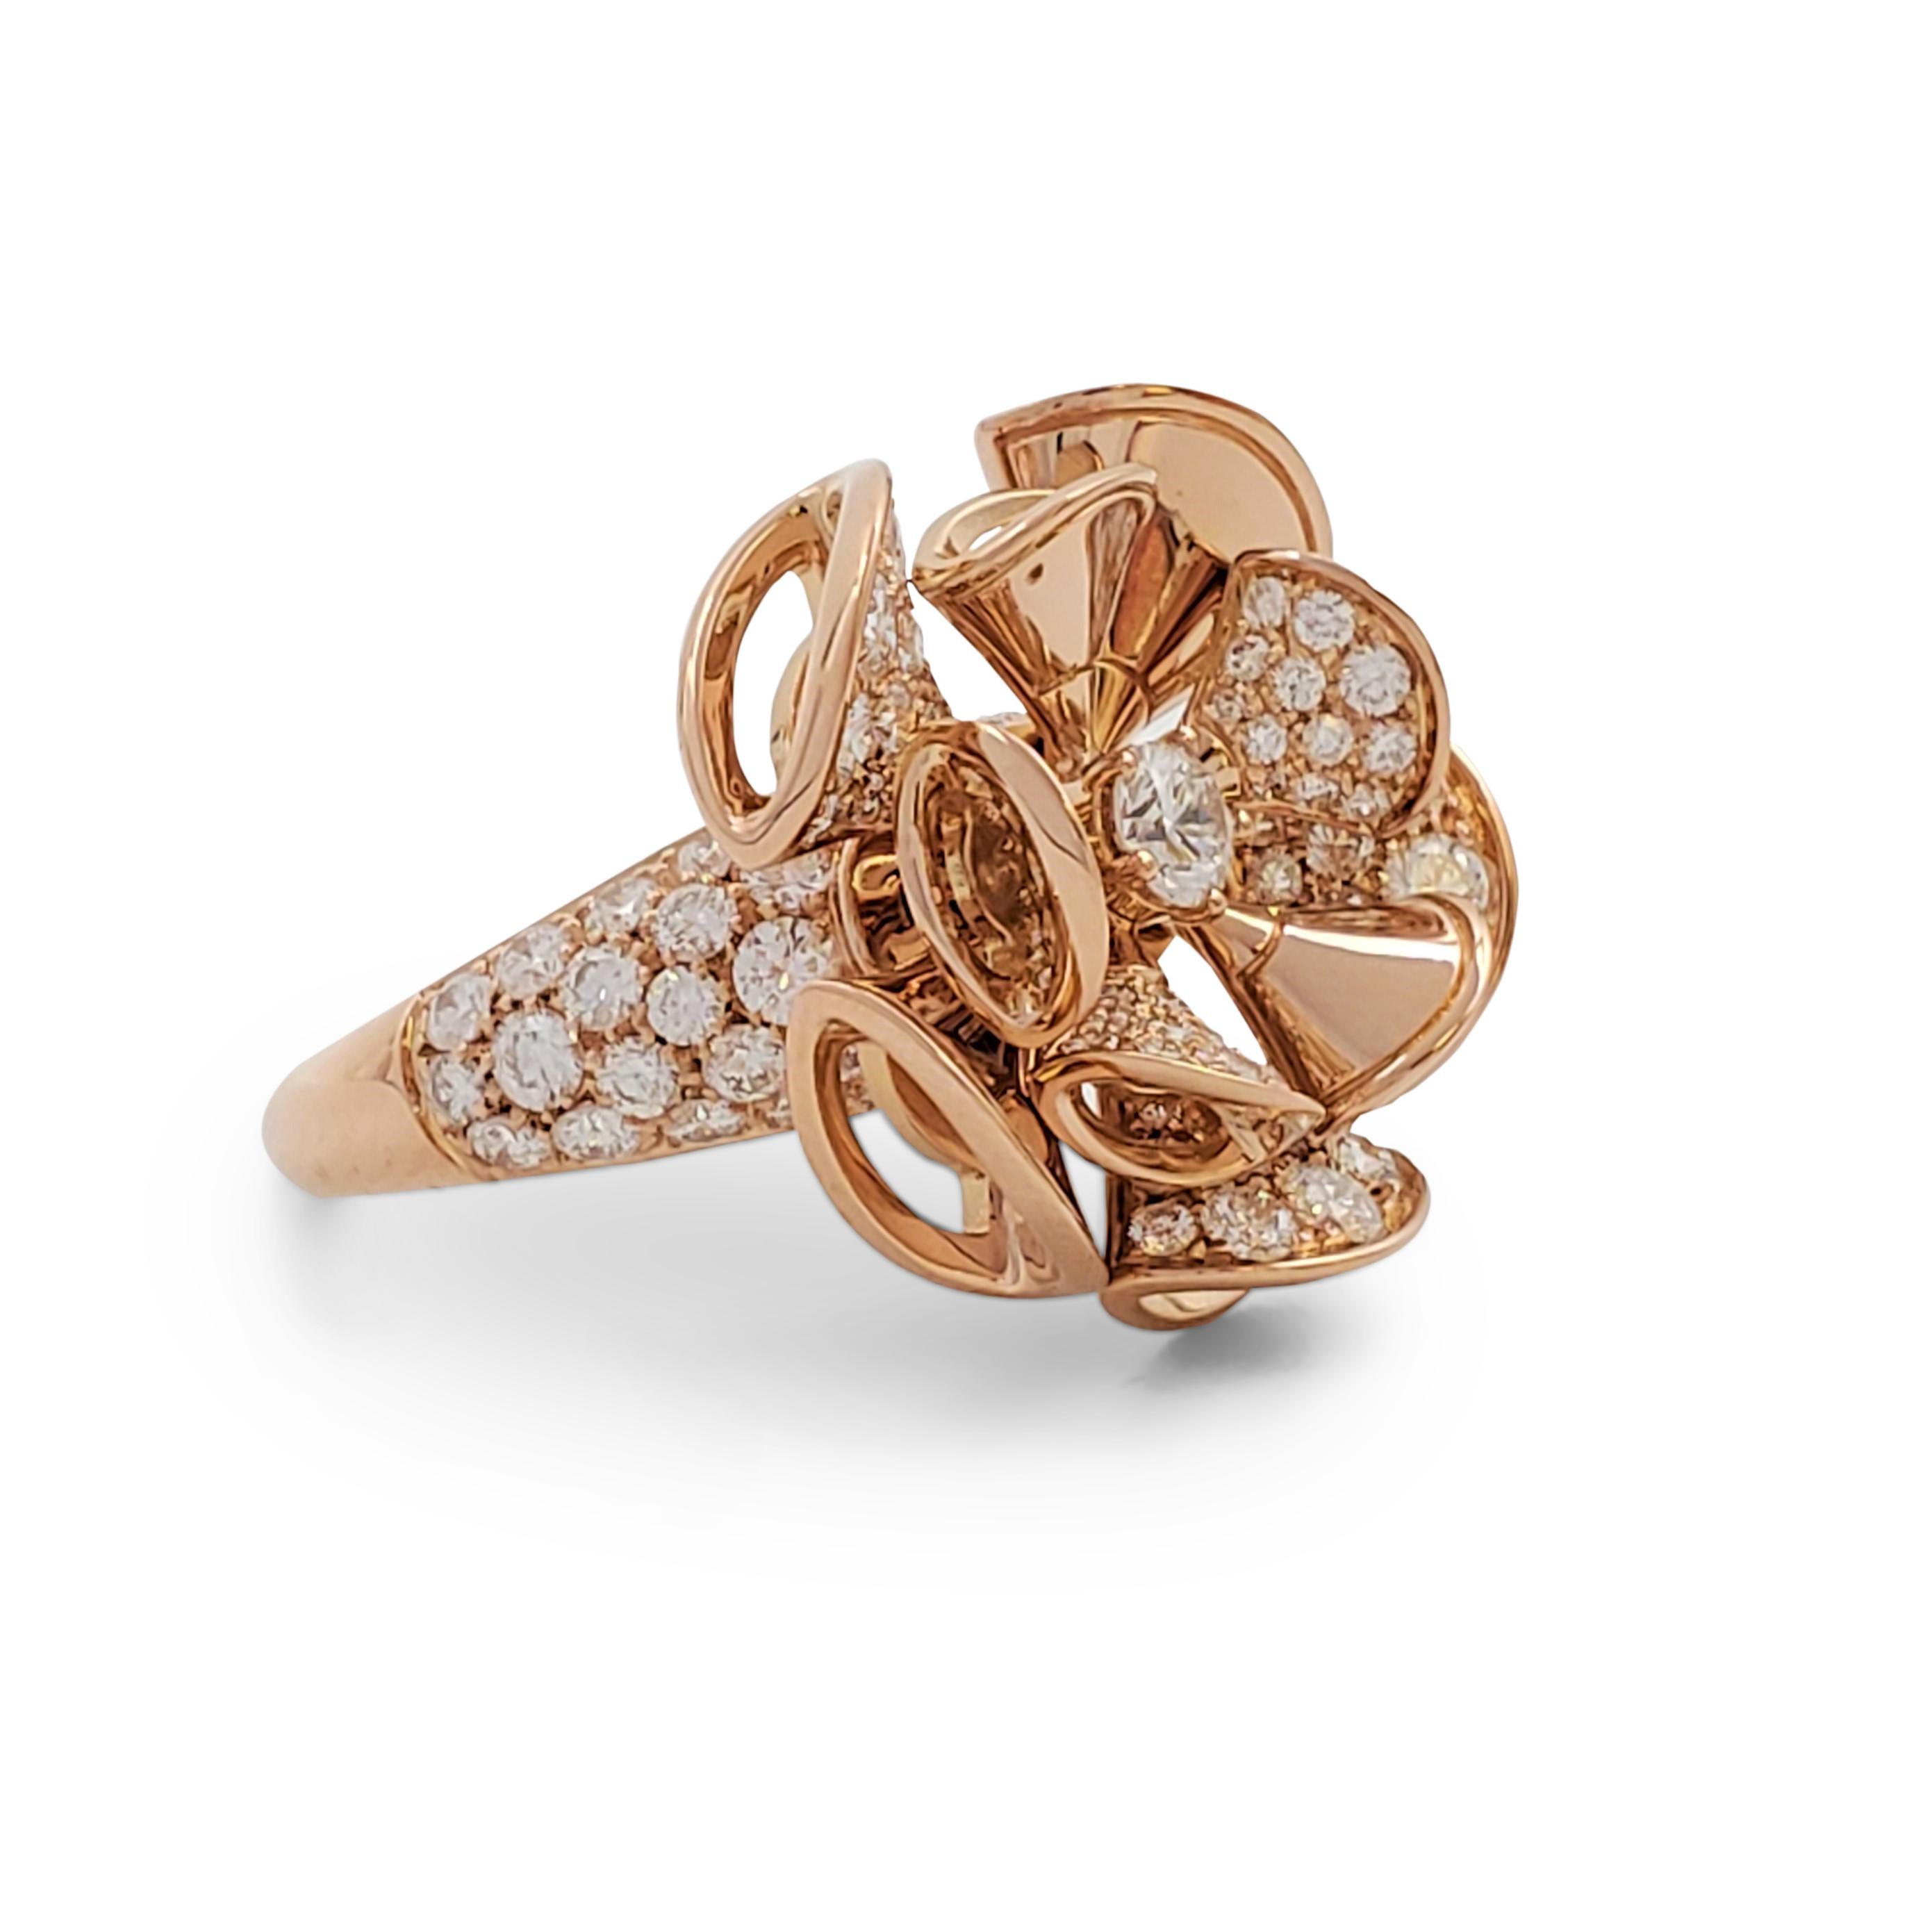 Authentic glamorous Bvlgari ring from the 'Divas' Dream' collection centers on overlapping dancing fan-shaped elements crafted in 18 karat rose gold and set with an estimated 3.00 carats of high-quality round brilliant cut diamonds (E-F, VS). Signed